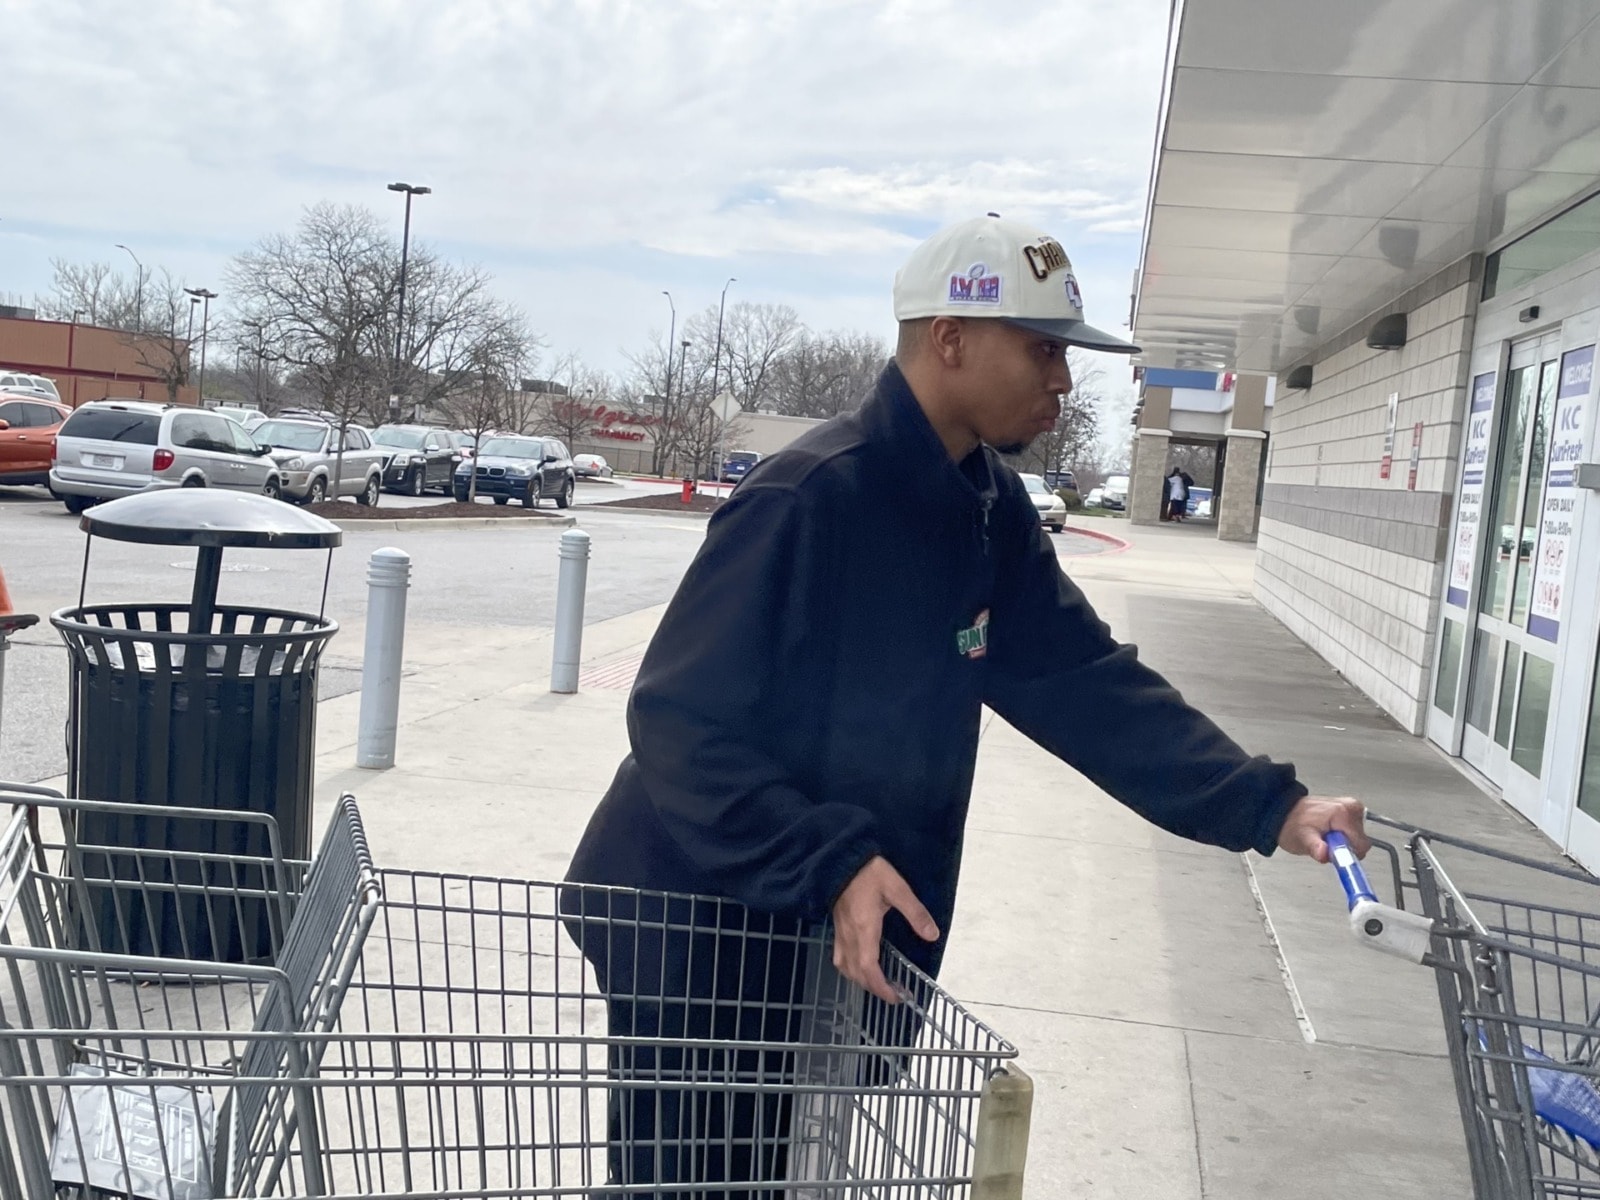 Young man pushing carts outside of a grocery store.